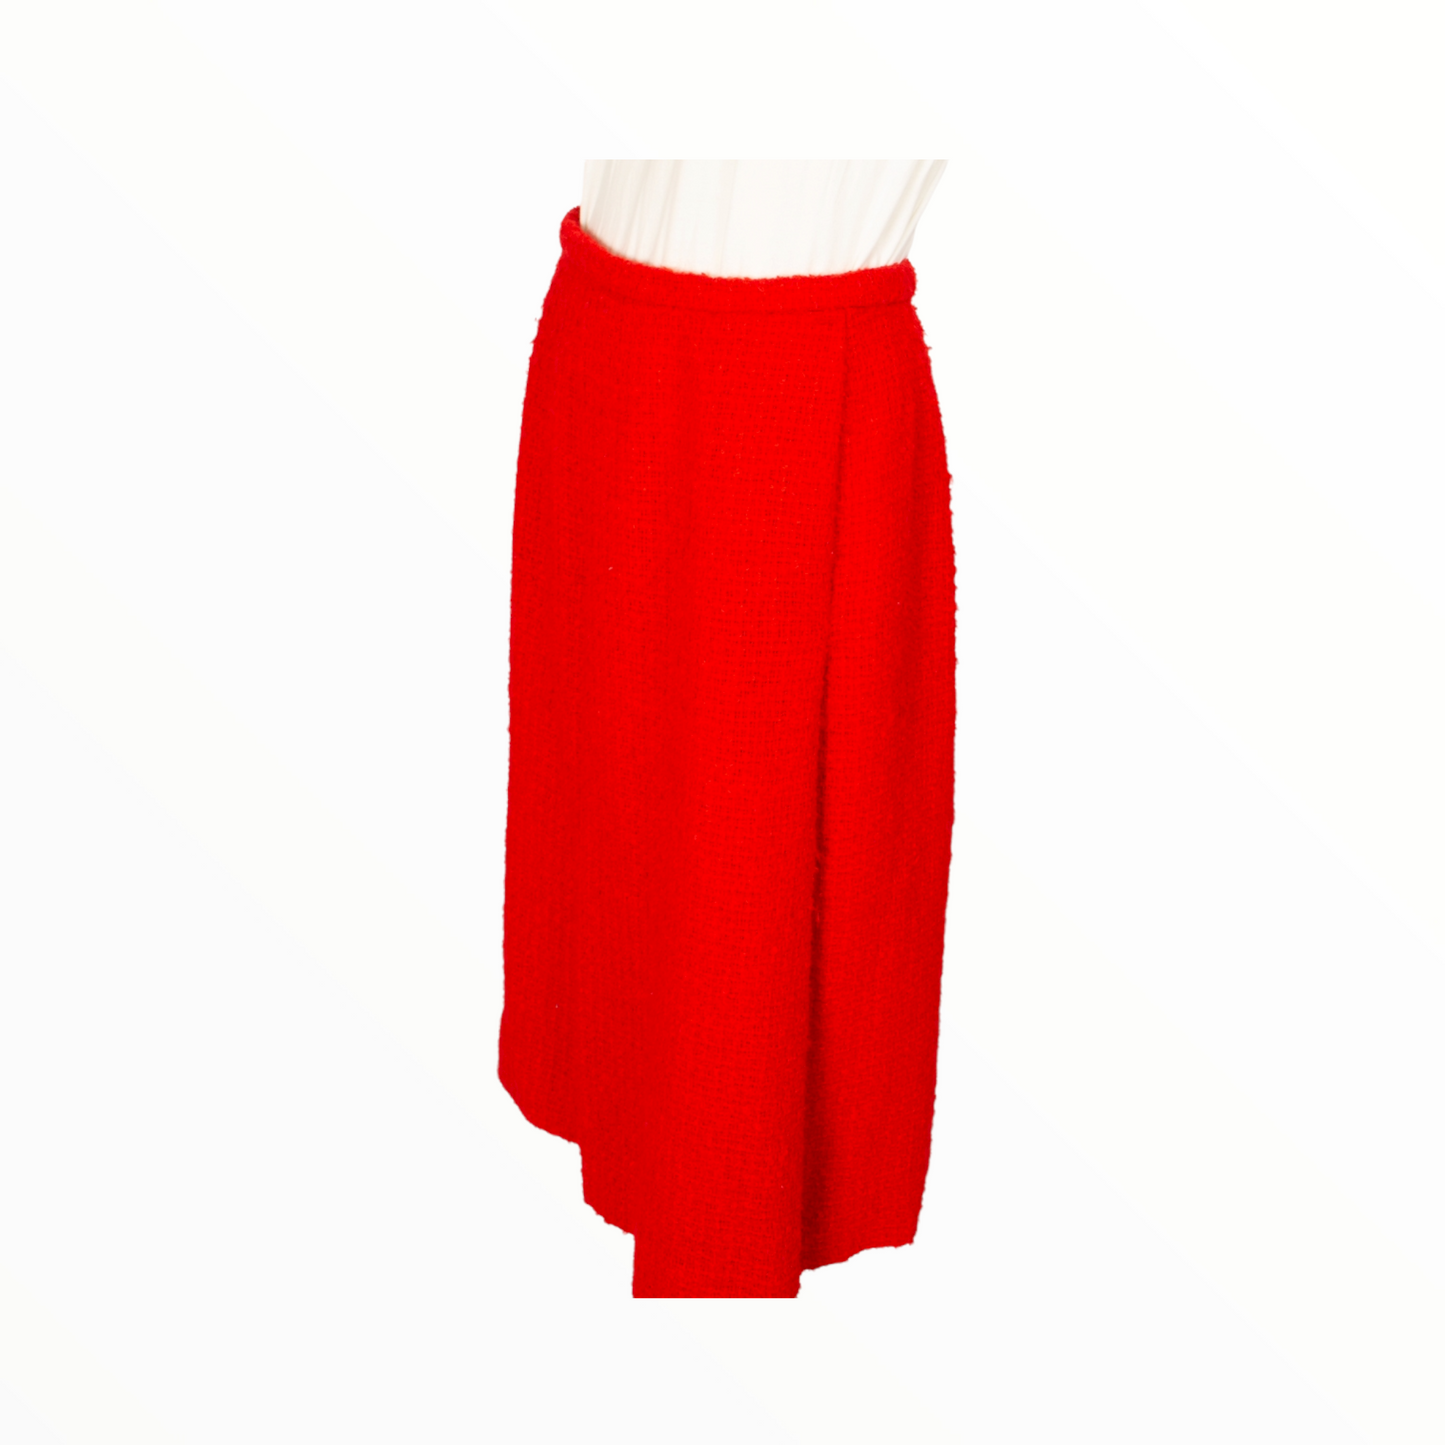 CHANEL Skirts vintage Lysis Paris pre-owned secondhand